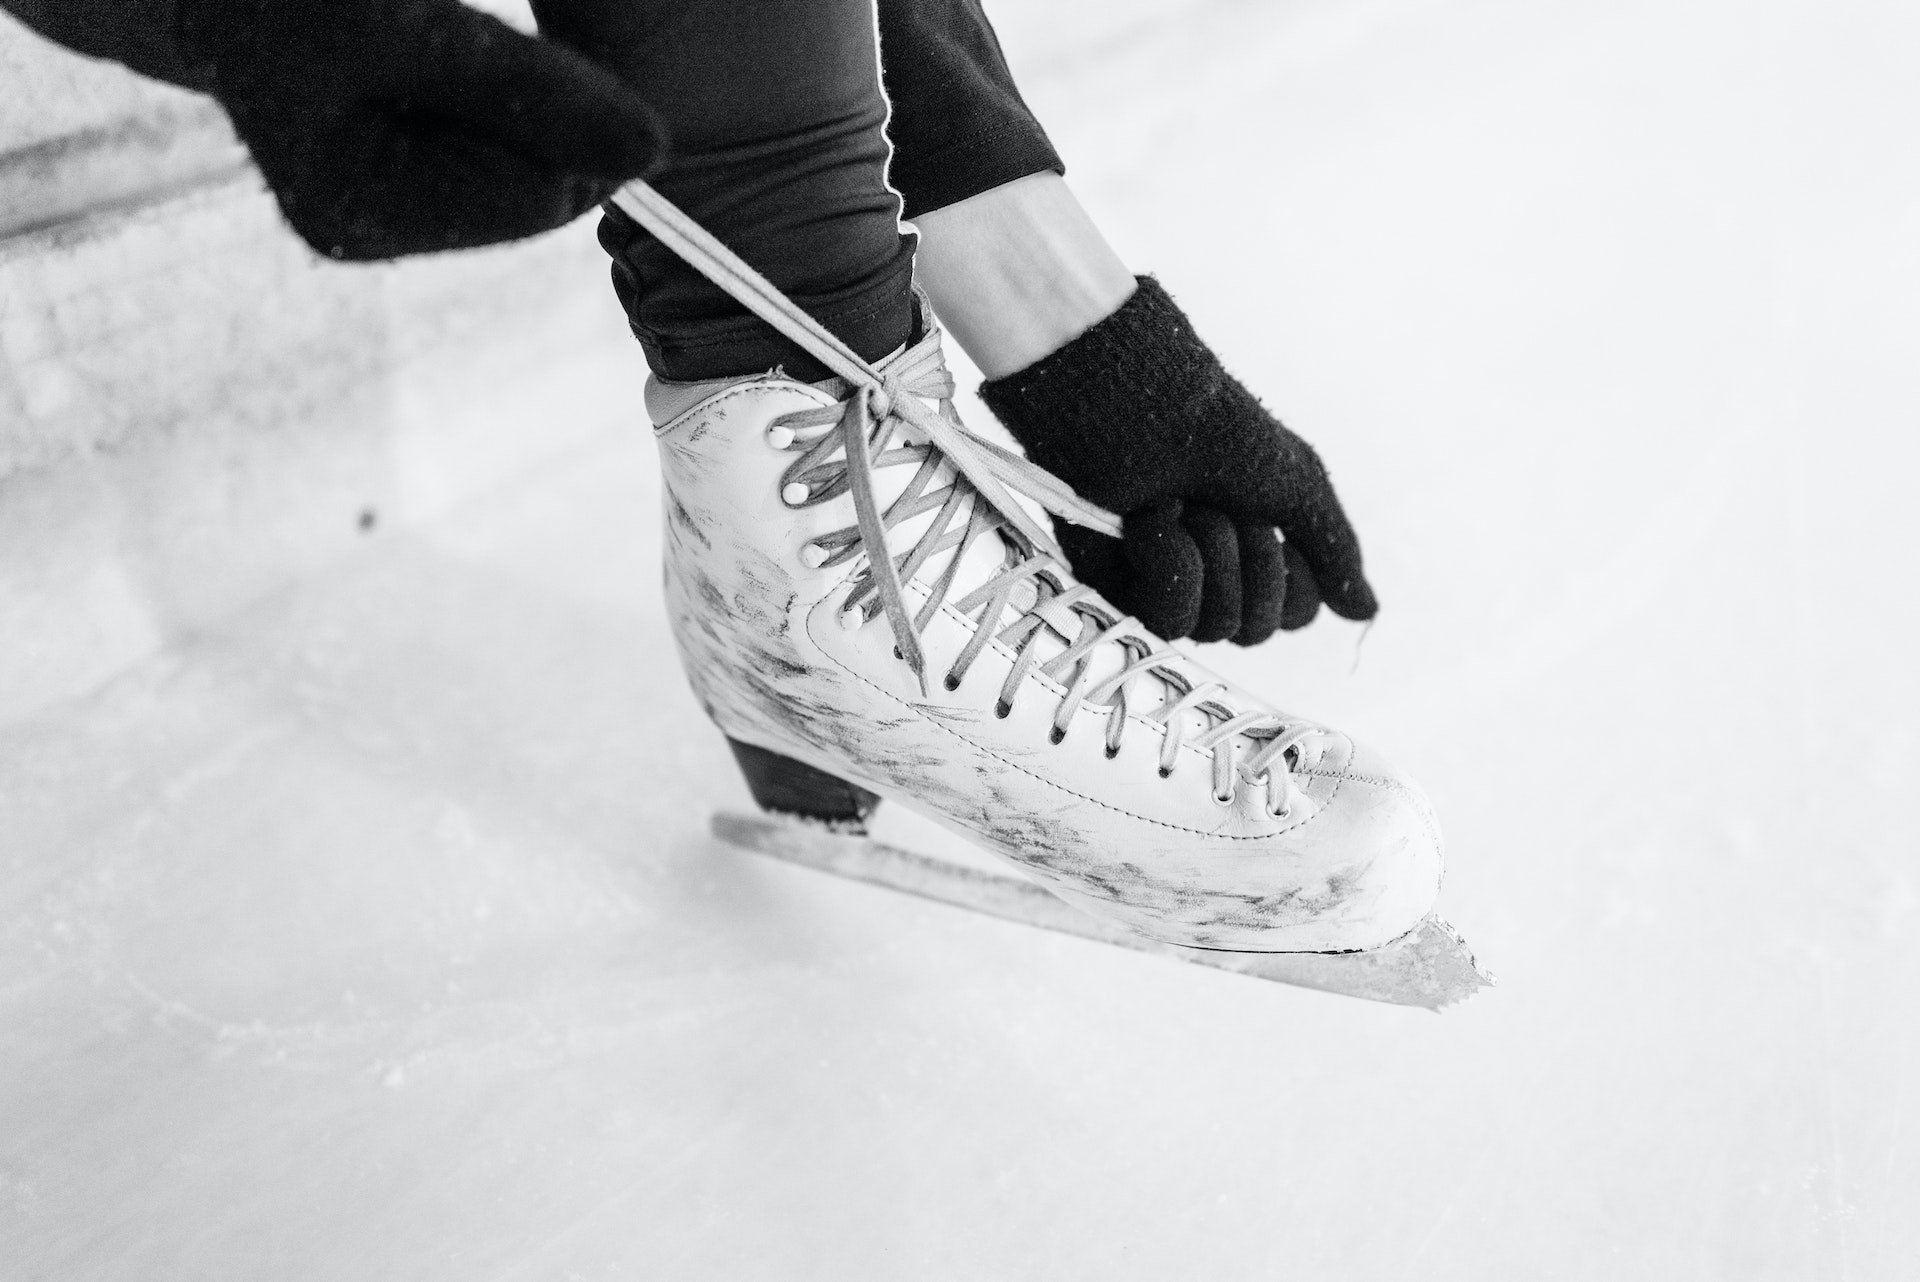 Learn more about Skate Kootenay and the Clubs in our Region